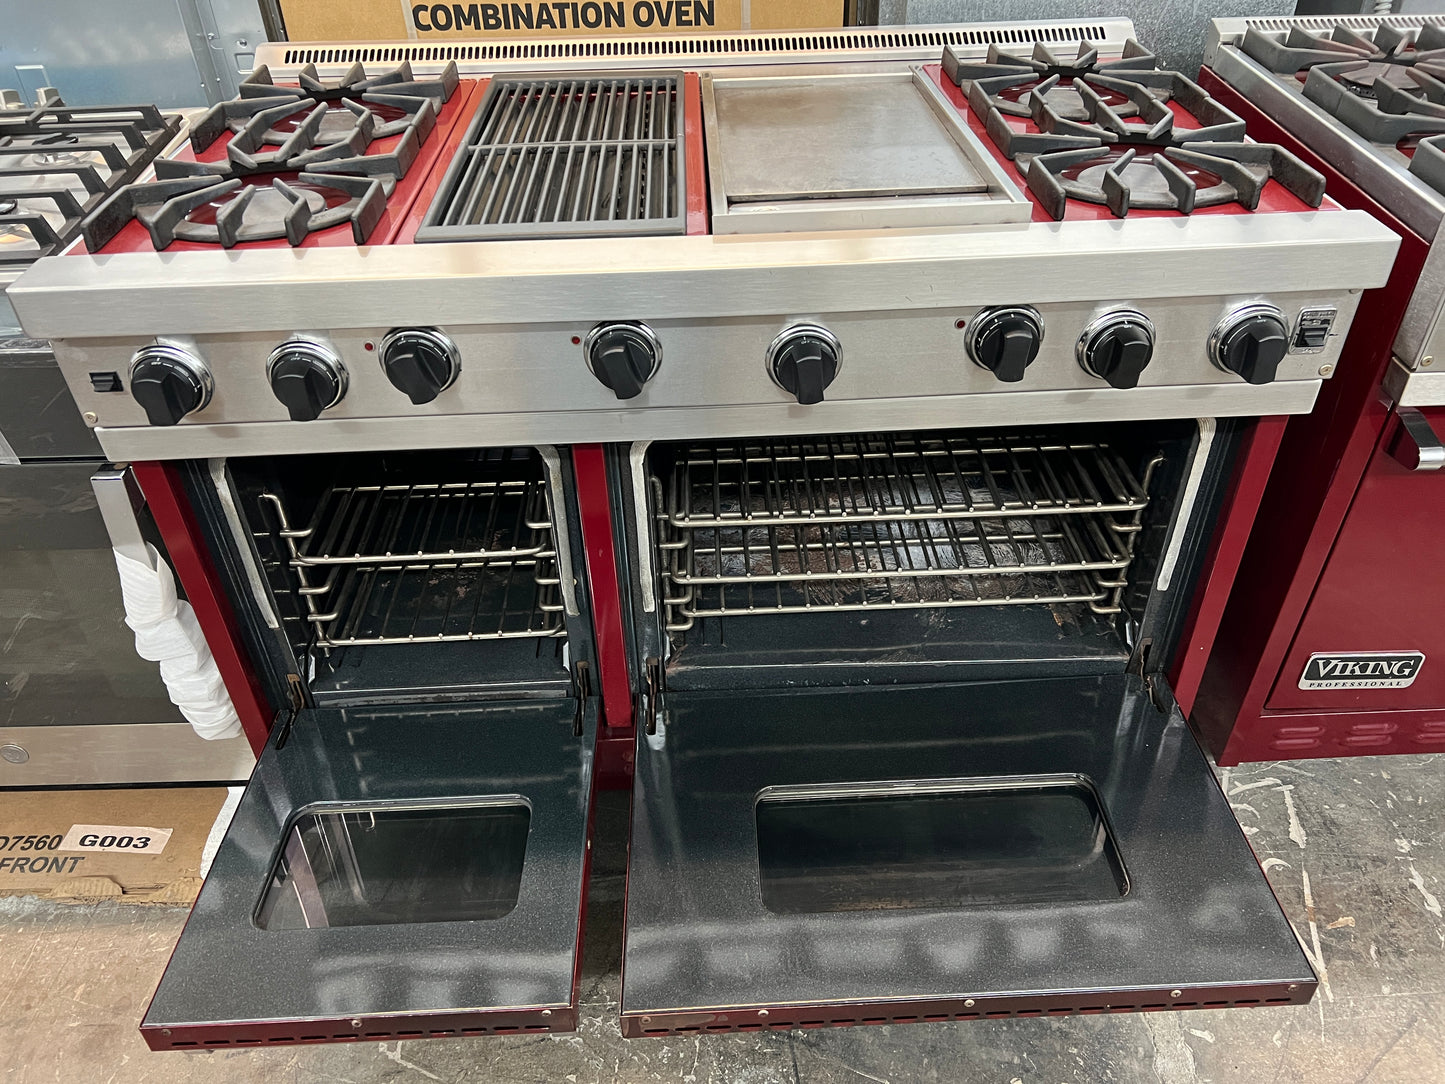 Viking 48 Inch VGRC4854GQDBU Red Stainless Steel Gas Range, Griddle, Grill, 4 Burners, 2 Ovens, 777112